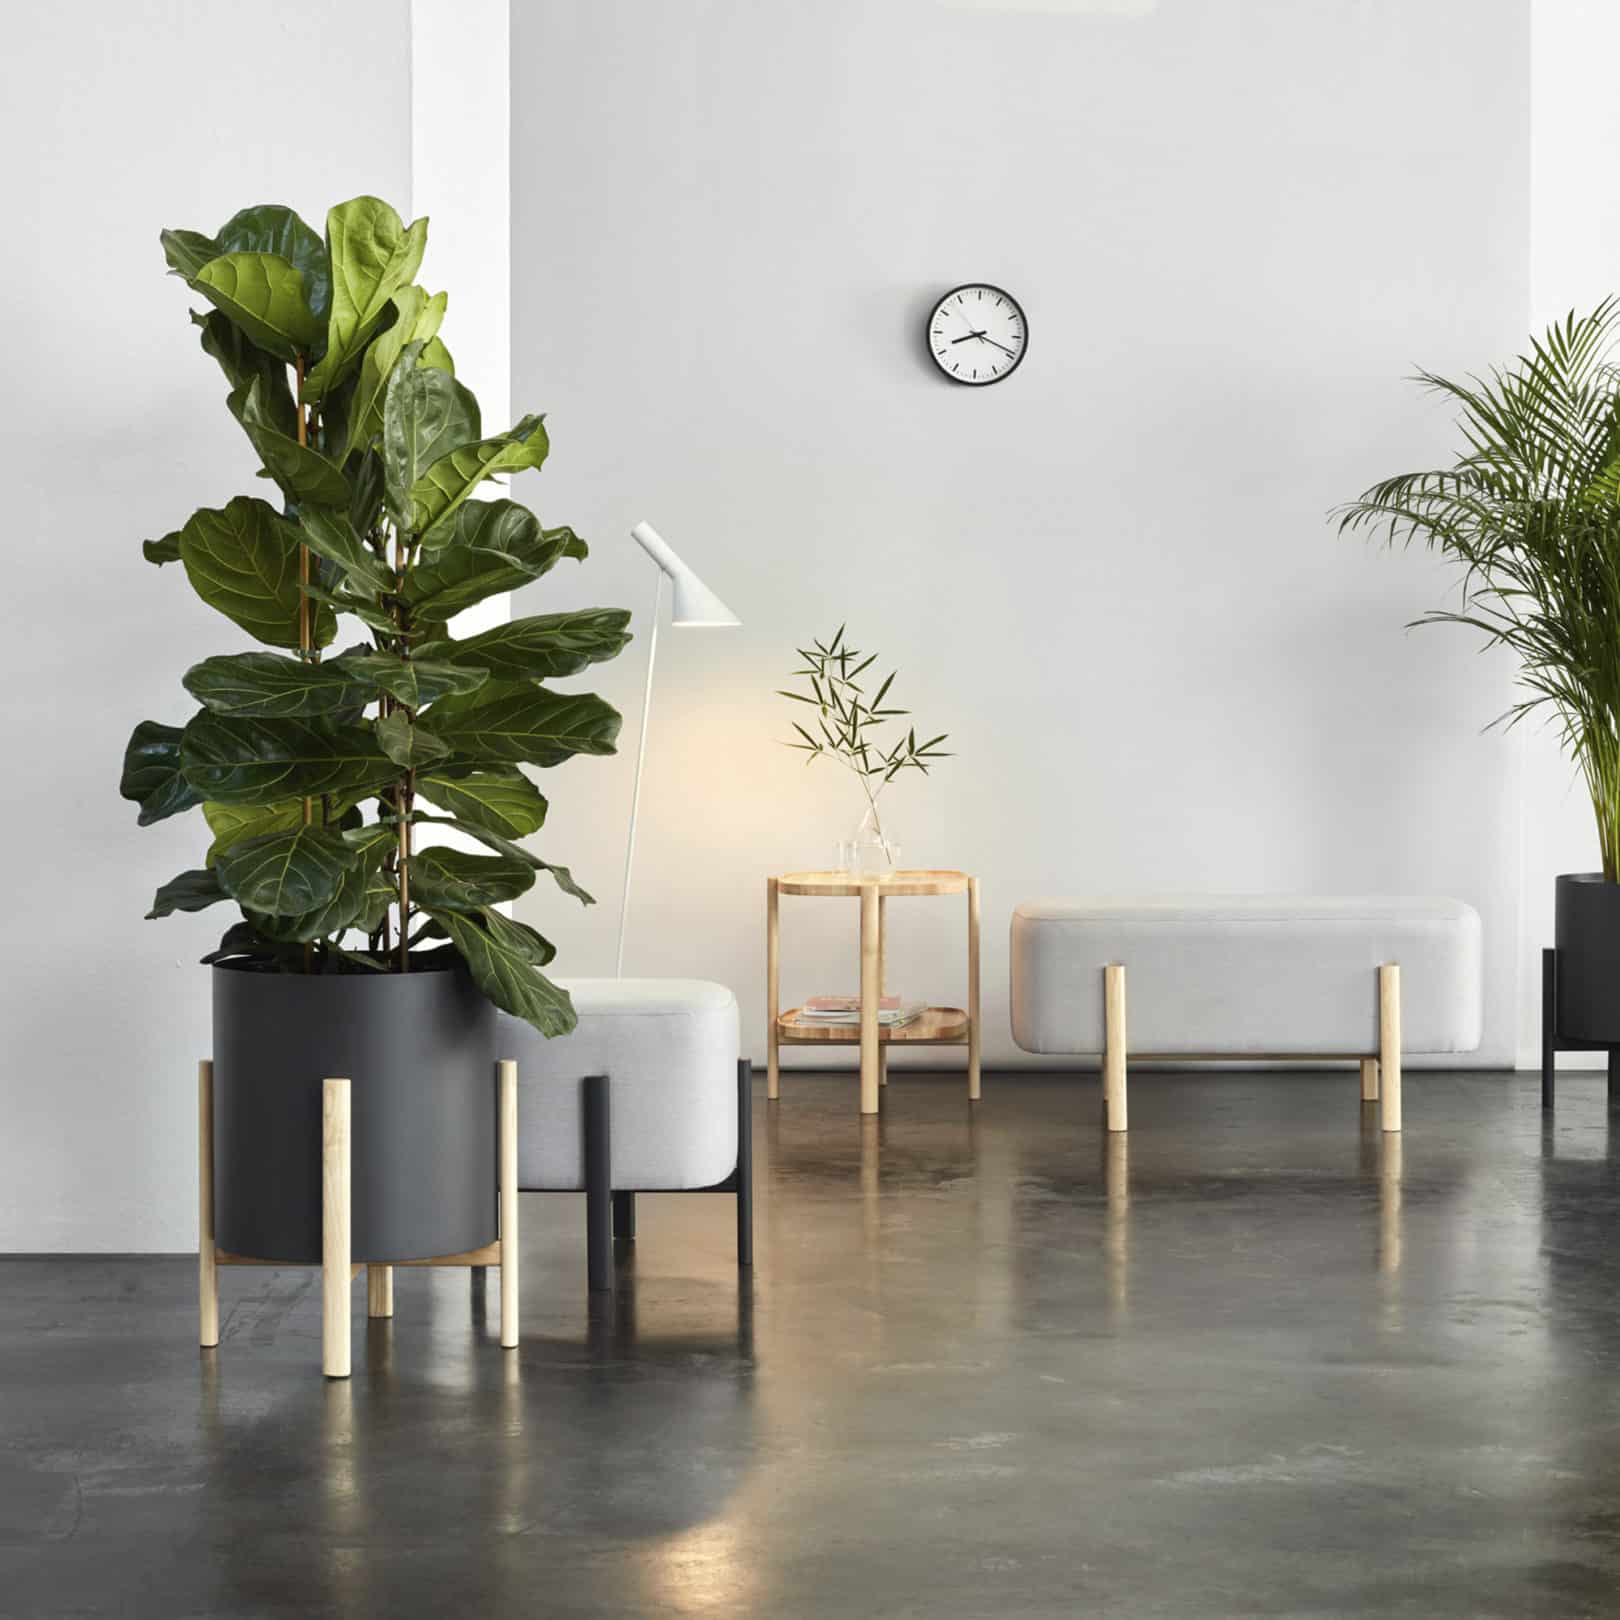 Setting of Fuse family with furniture and planters